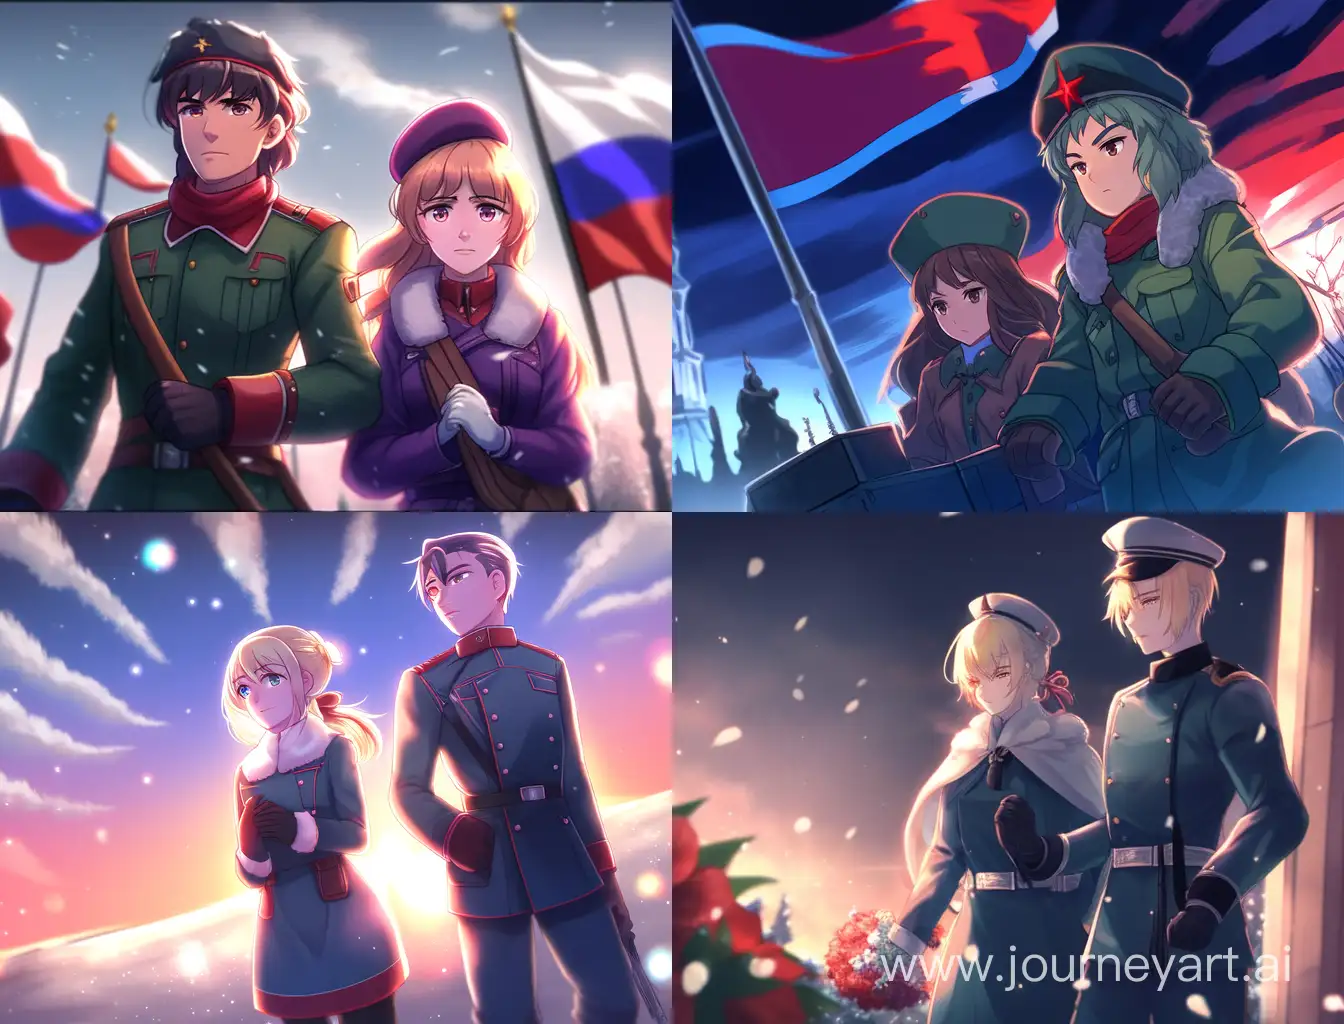 Anime-Art-Defender-of-the-Fatherland-Day-Celebration-with-Girl-and-Boy-in-4K-Resolution